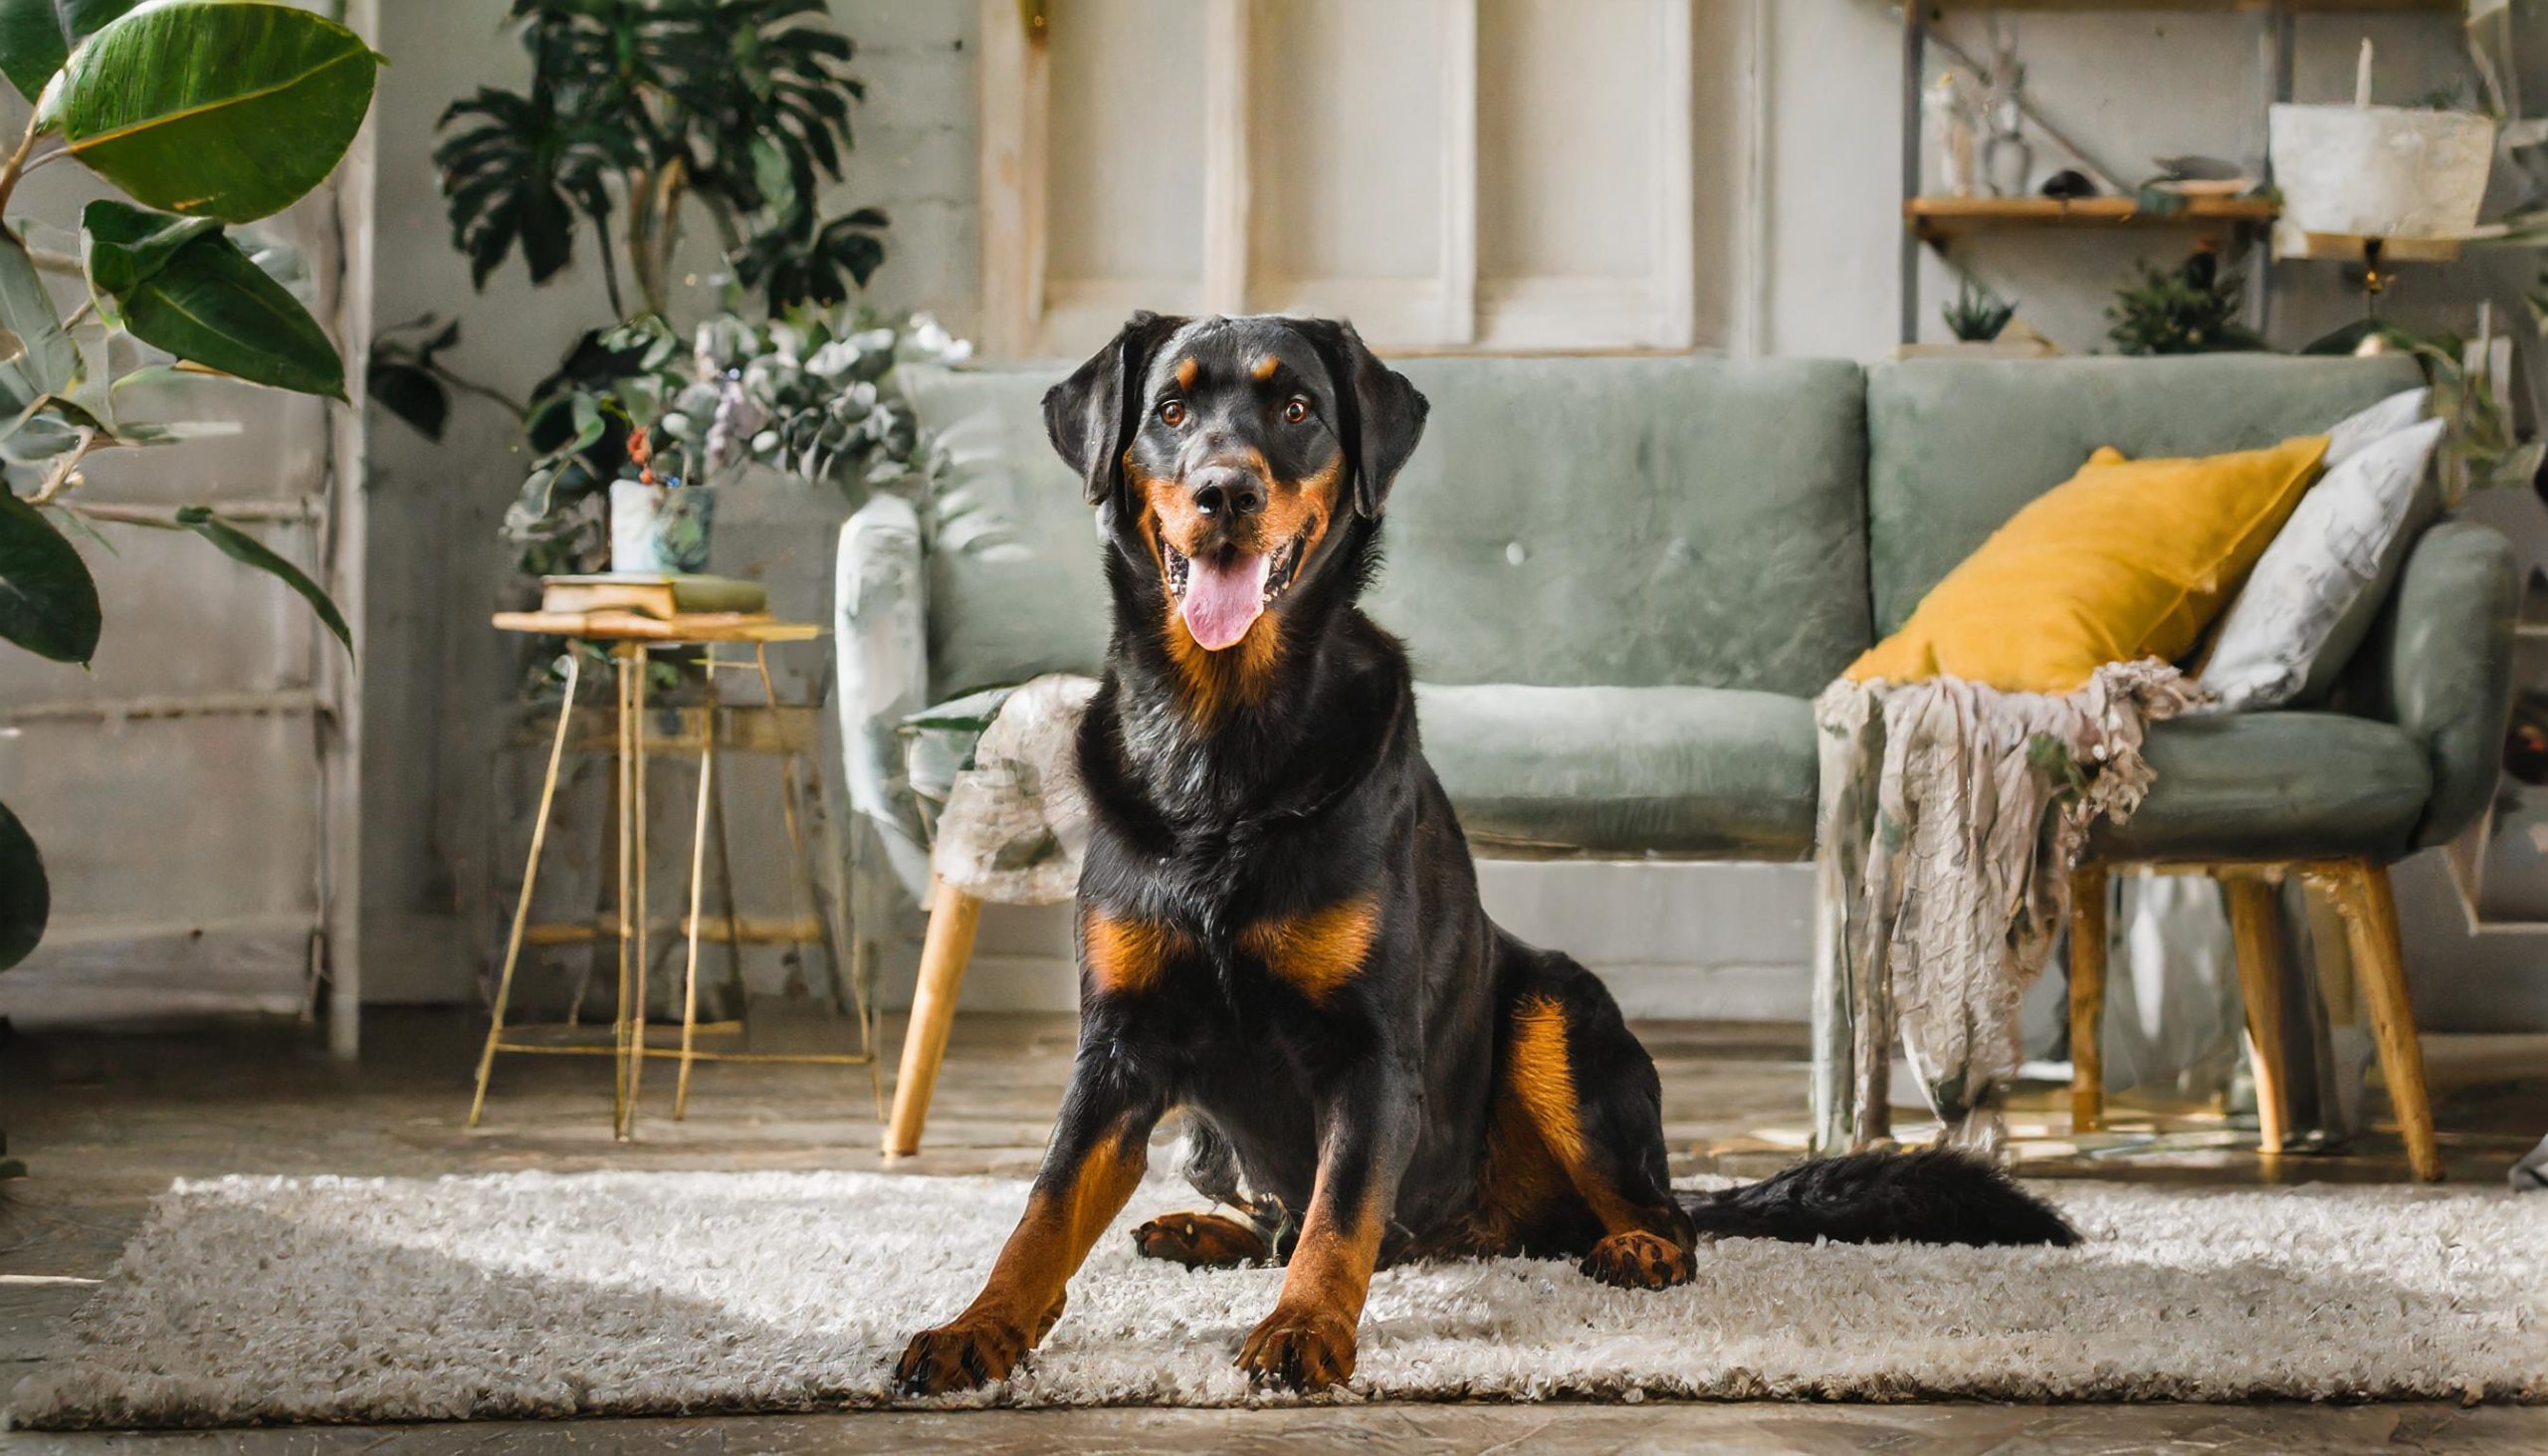 The beauceron, or berger de Beauce as its originally known, is a working dog from France. Developed in the 1500s as a hunter of wild boar, it also became useful as a herding dog and guardian of the flock.